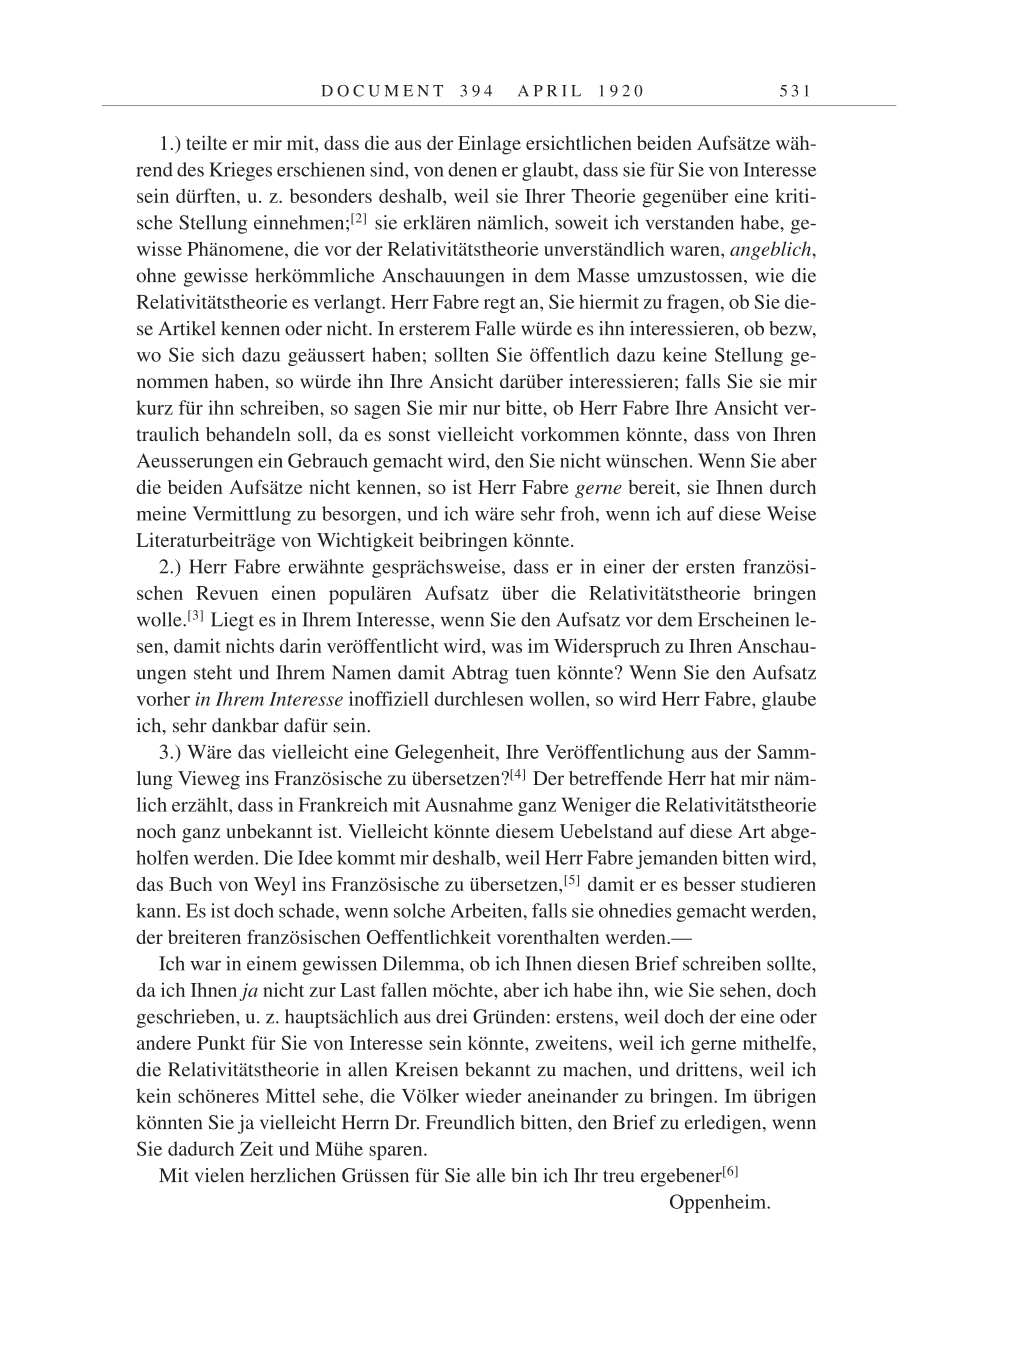 Volume 9: The Berlin Years: Correspondence January 1919-April 1920 page 531